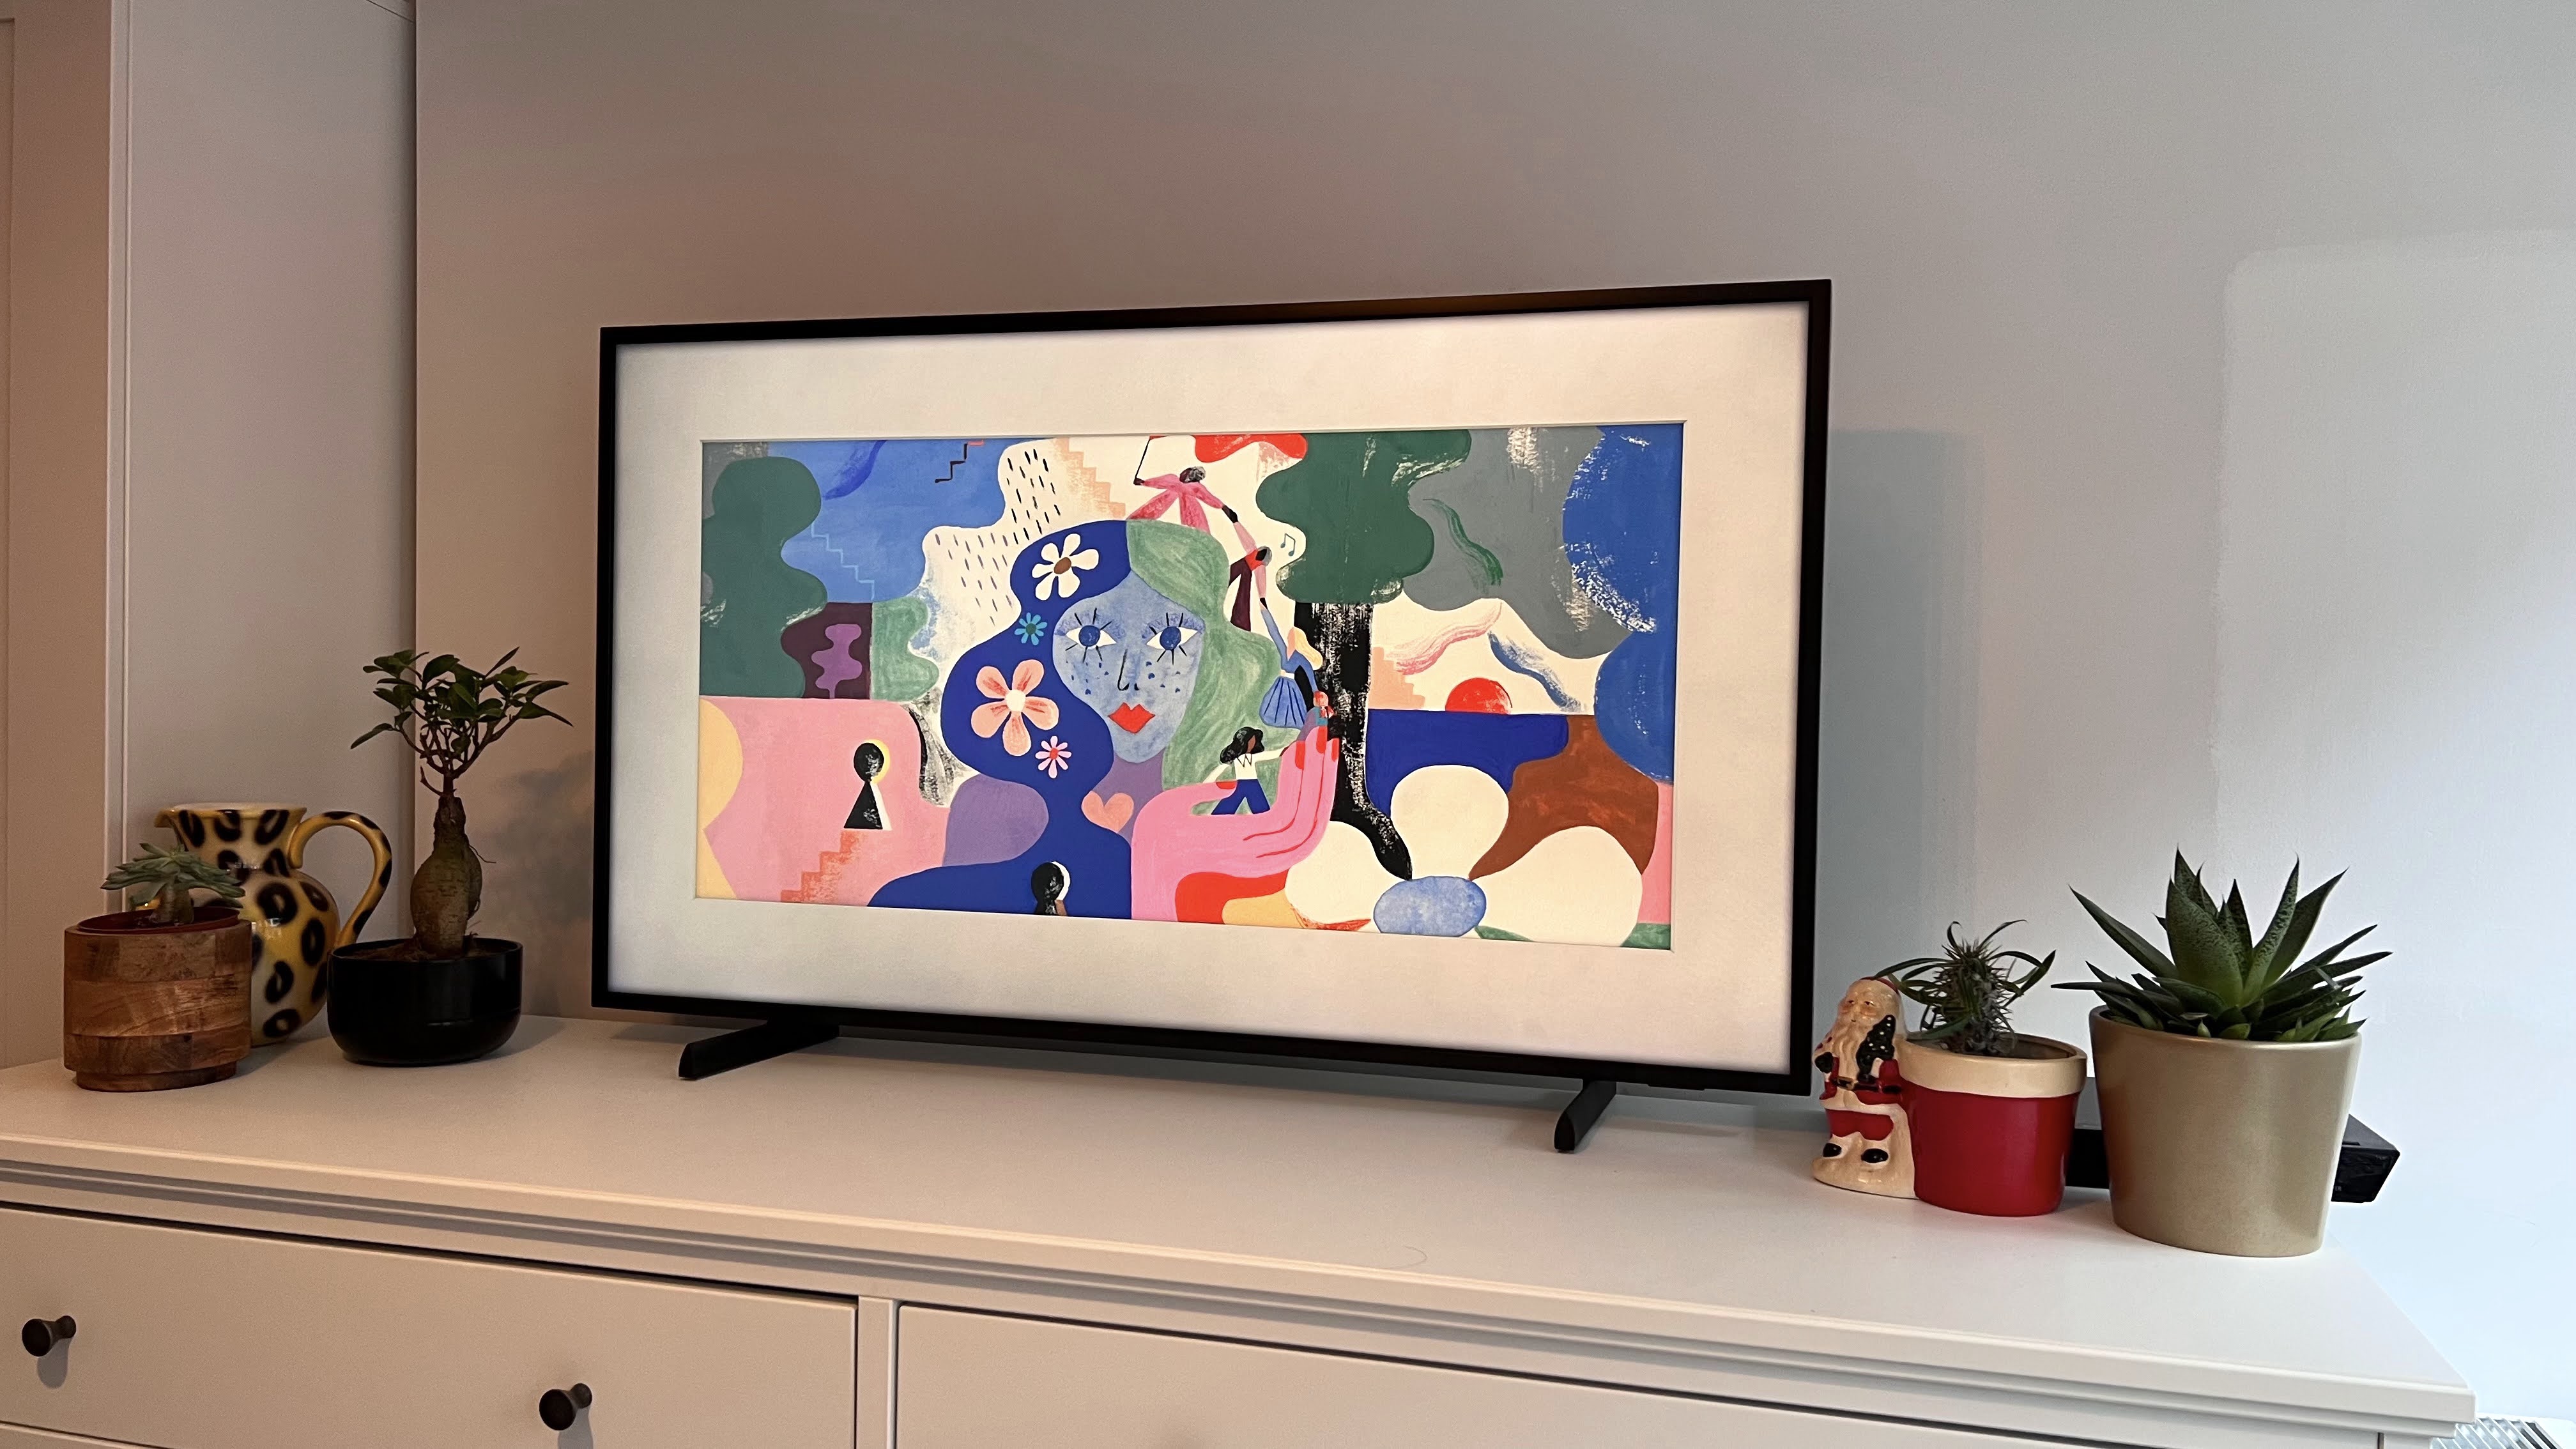 Samsung The Frame TV (2021) review: for fashion and function